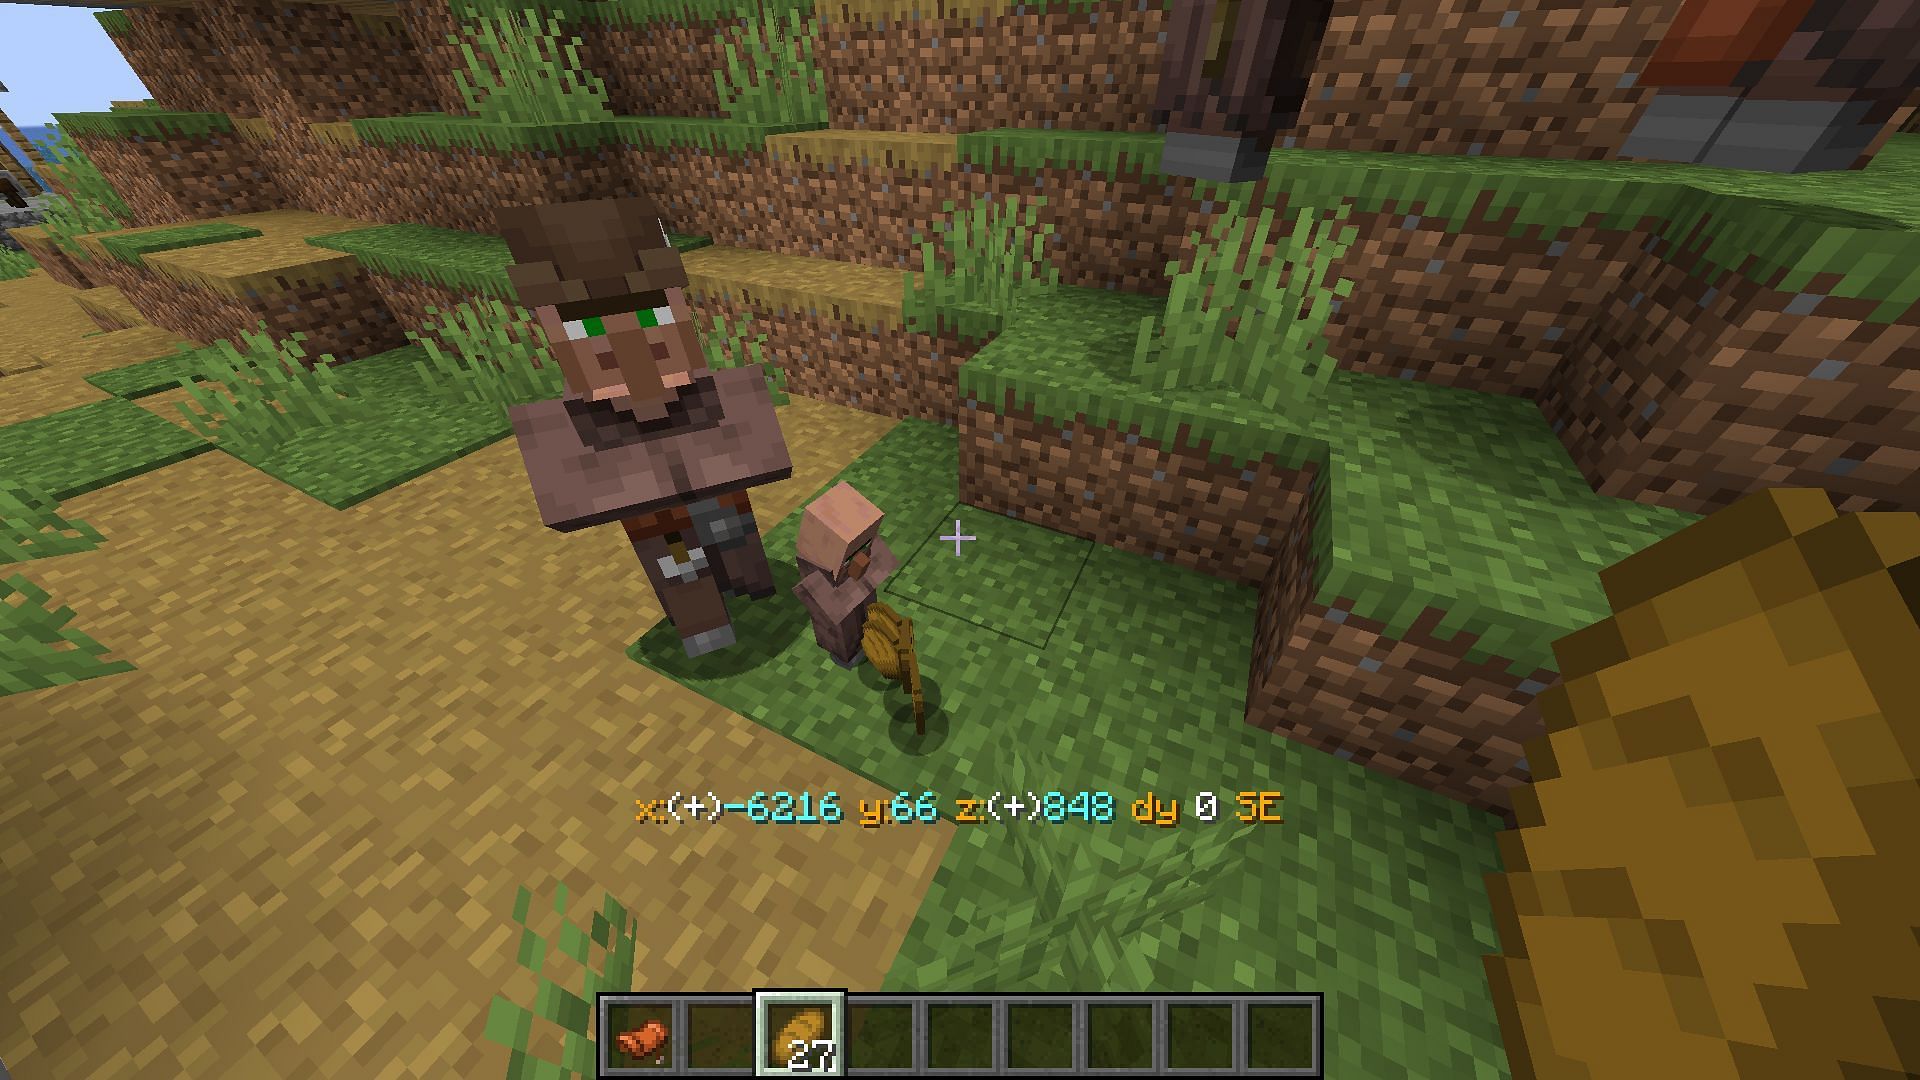 The baby villager might take bread, but they will grow at their own pace in Minecraft (Image via Mojang)